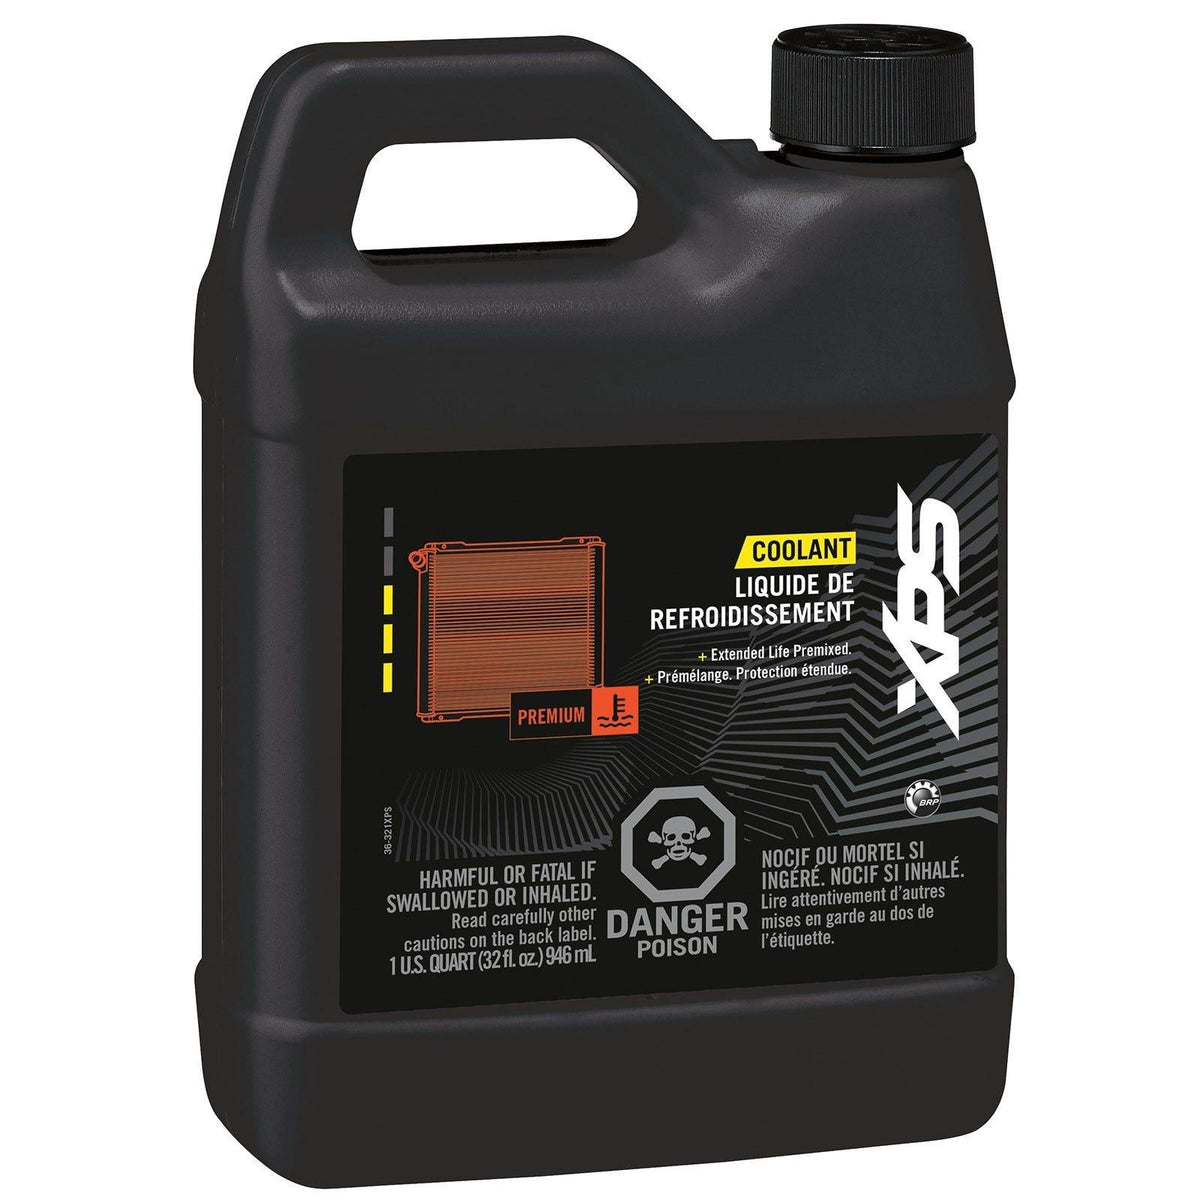 Extended Life Pre-mixed Coolant